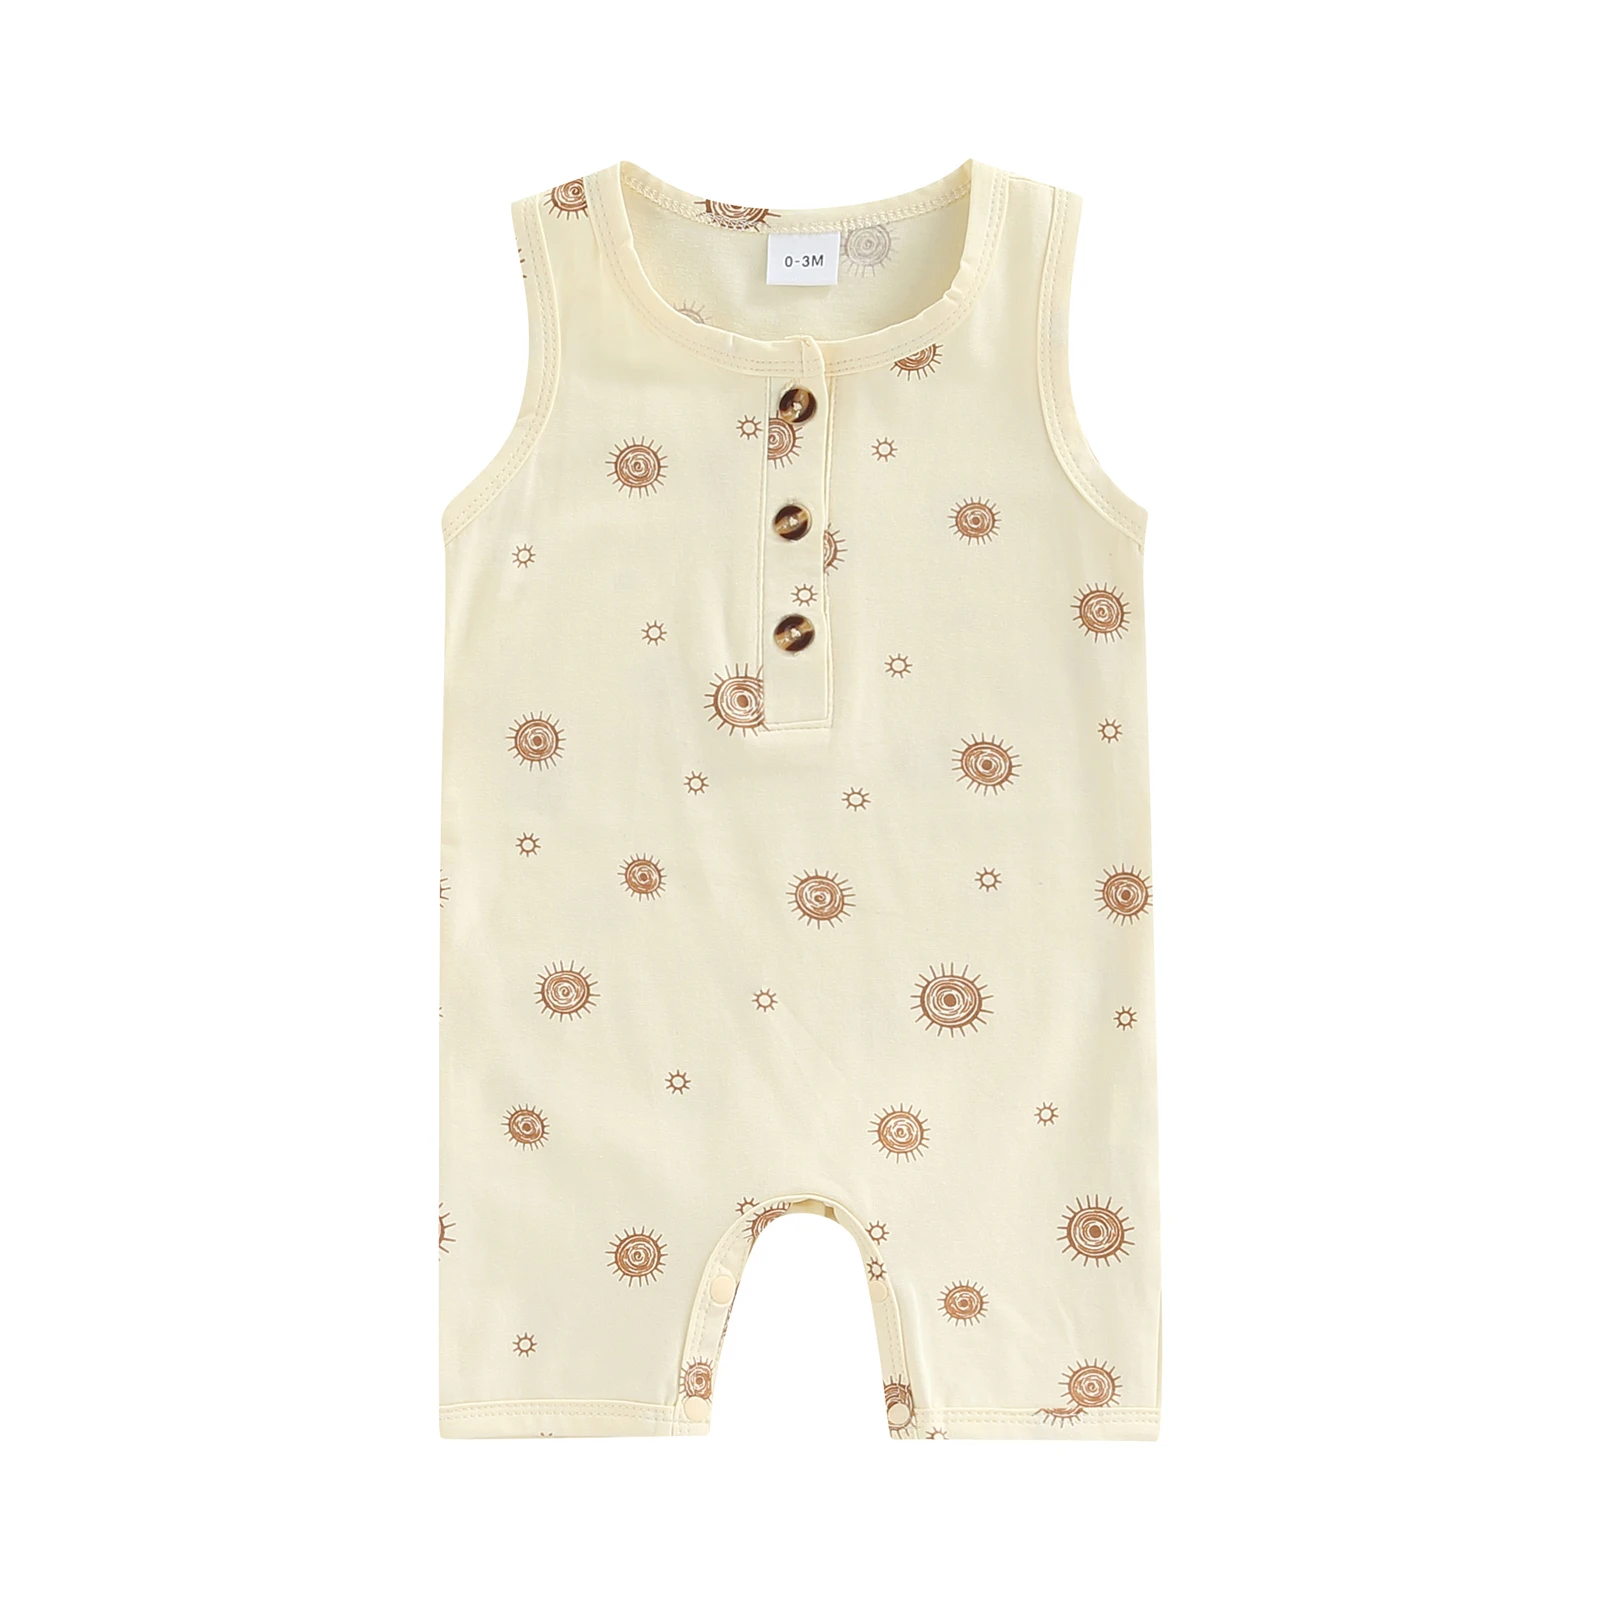 2022-03-01 Lioraitiin 0-12M Infant Baby Boy Girl Casual Romper Summer Sleeveless Printting O-Neck Snap Crotch Jumpsuit customised baby bodysuits Baby Rompers